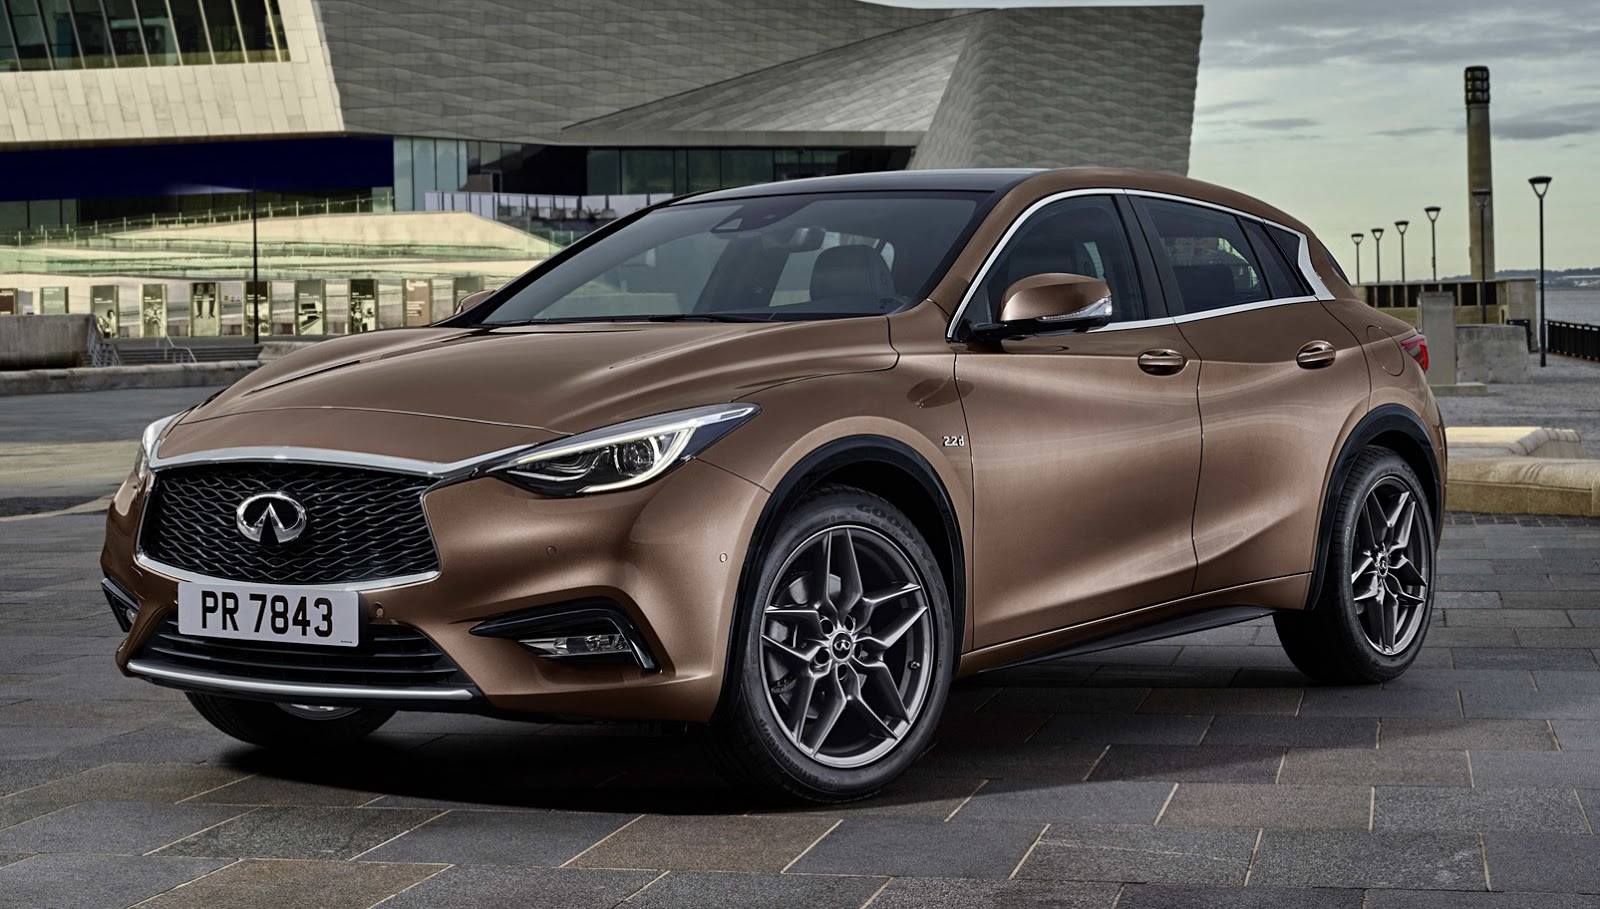 Infiniti Q30 revealed in production form, or is it the QX30?